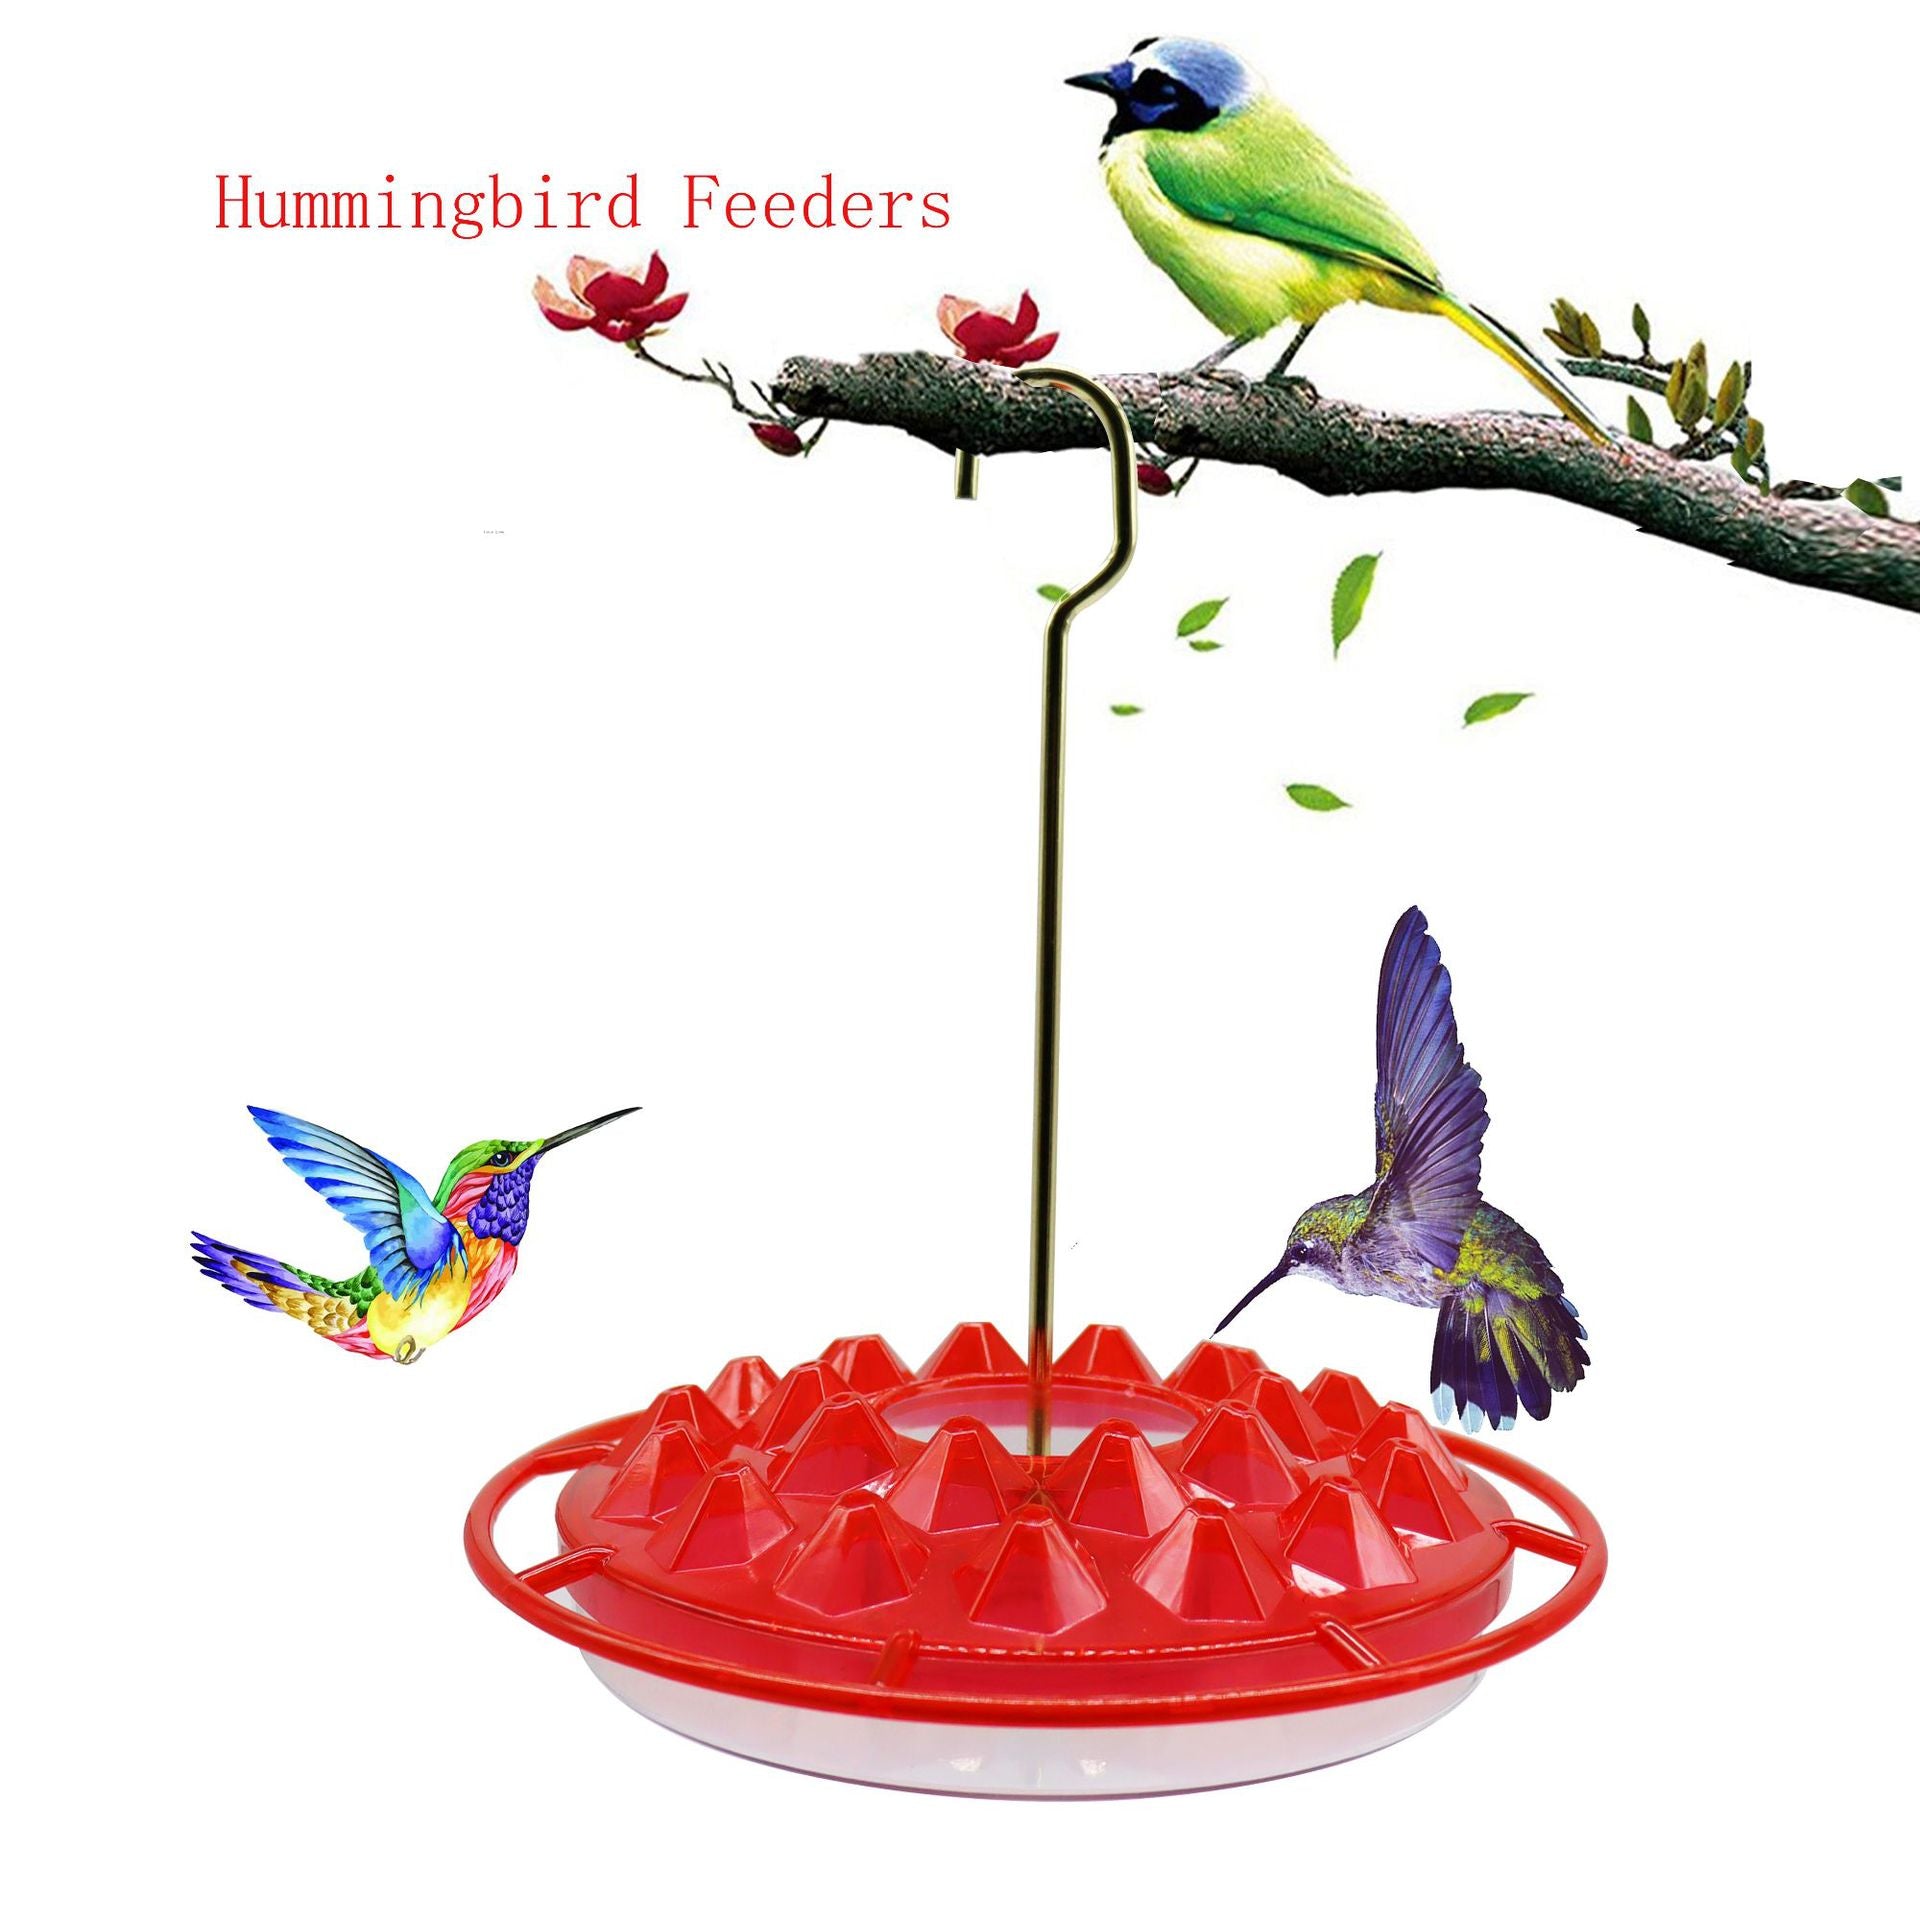 Hummingbird Feeder with Resting Bar and Ant Mote Perfect for your Hummingbird friends.